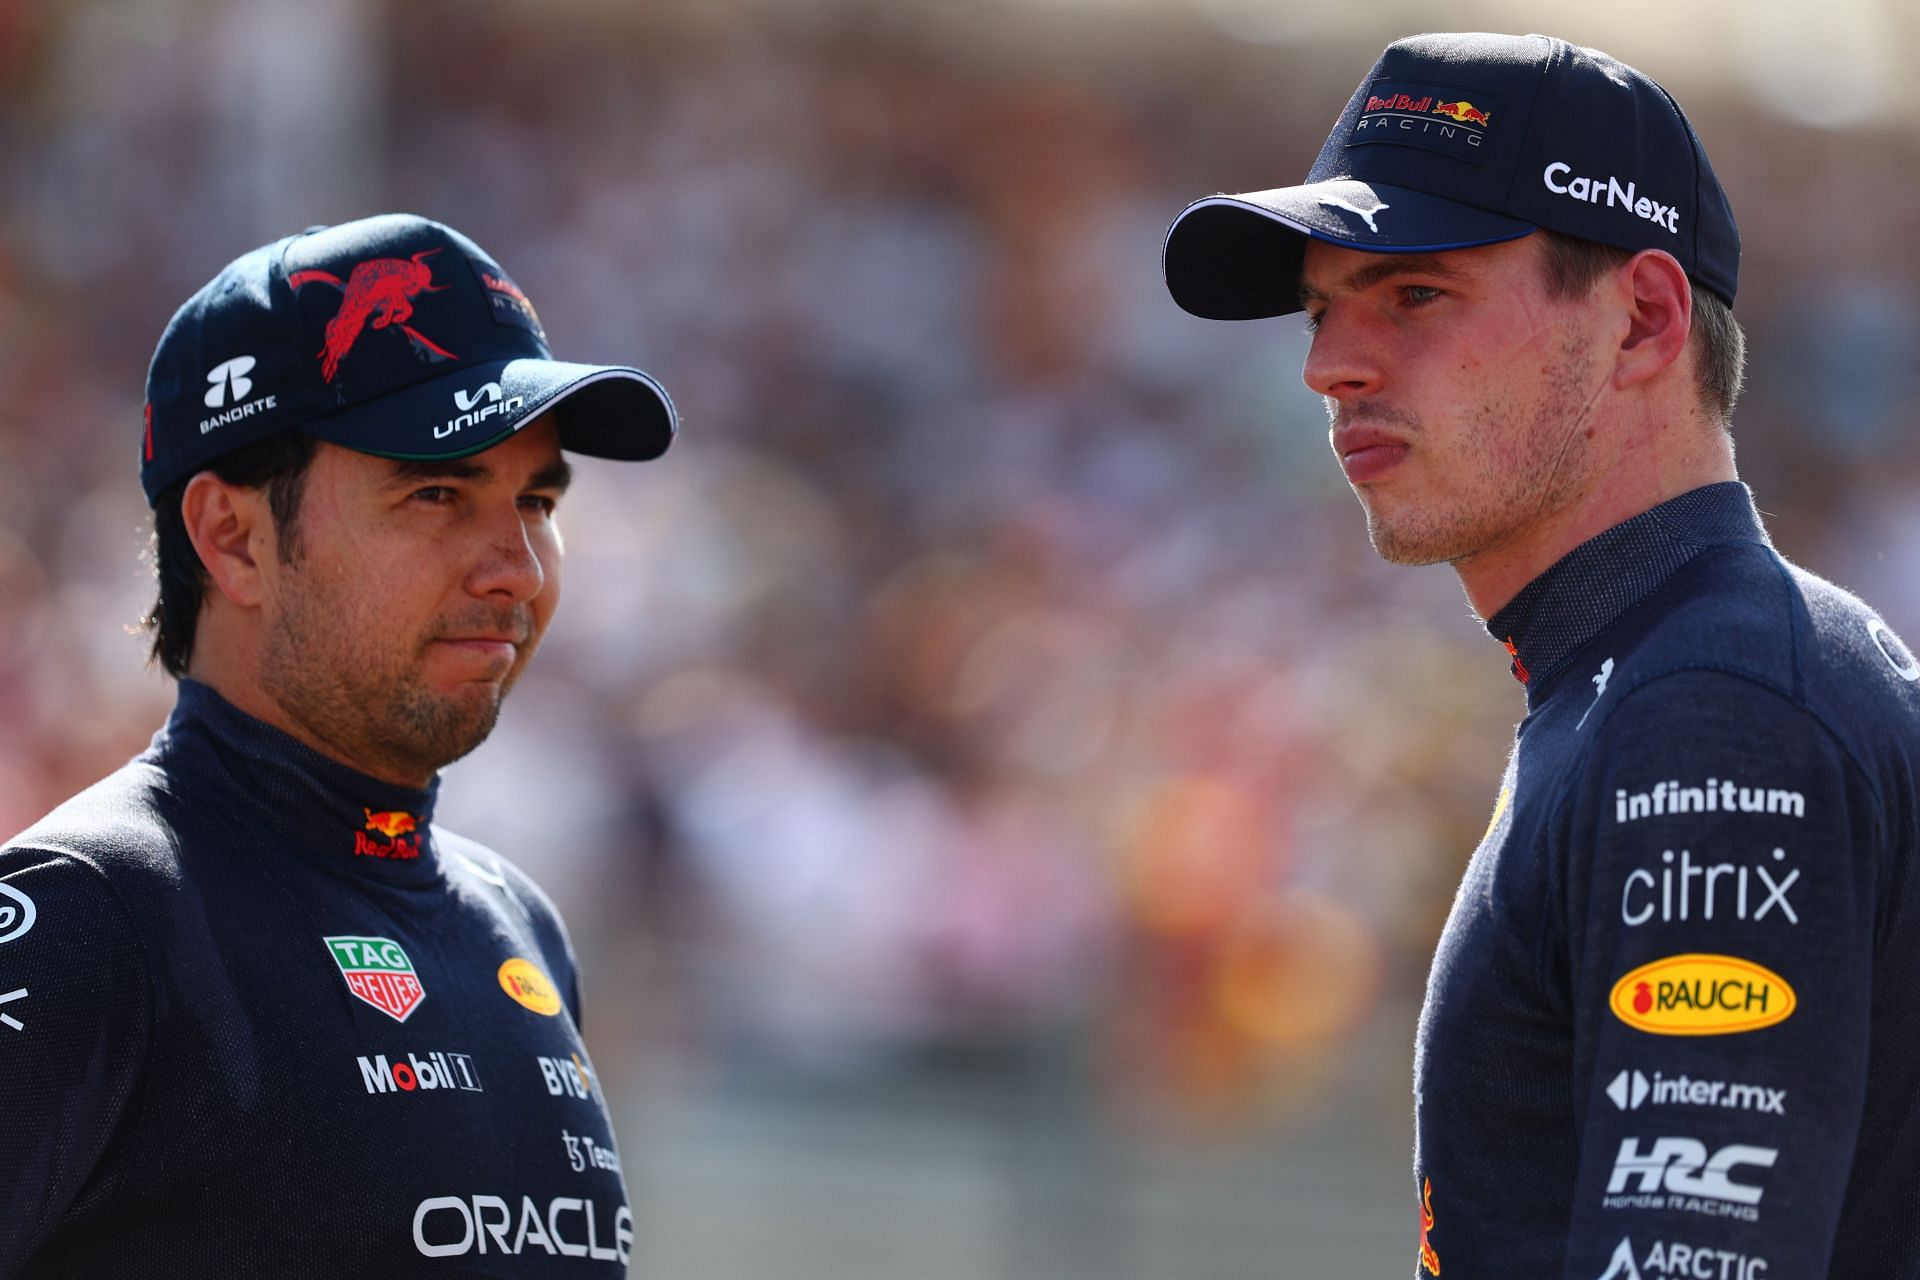 Red Bull drivers Sergio Perez (left) and Max Verstappen (right) photographed together during the 2022 F1 French GP weekend (Photo by Mark Thompson/Getty Images)